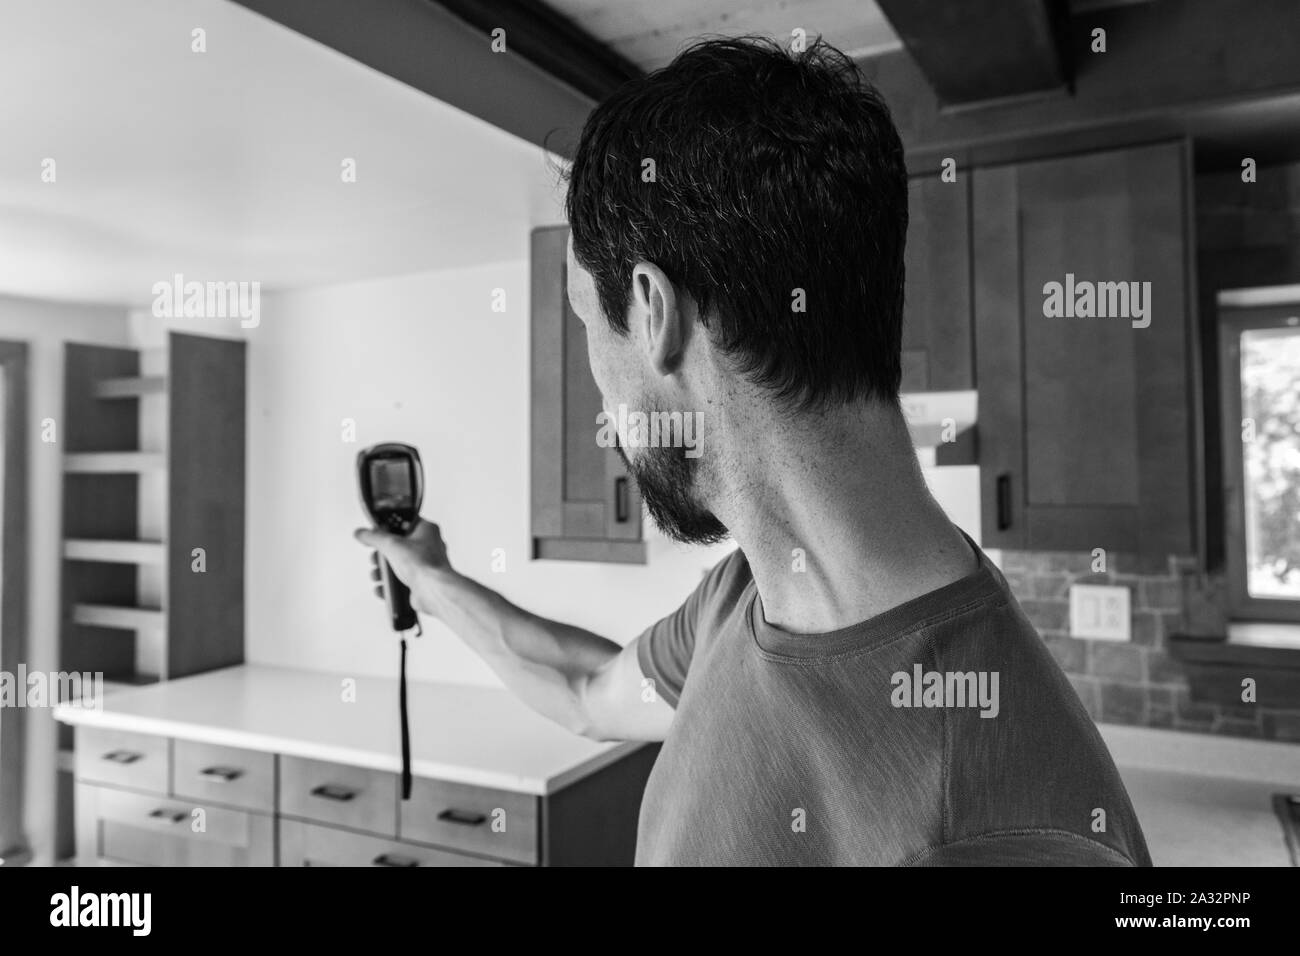 A close up and monochrome view of a man using a small hand held thermal imagery device inside a family kitchen during a building survey, with copy-space. Stock Photo